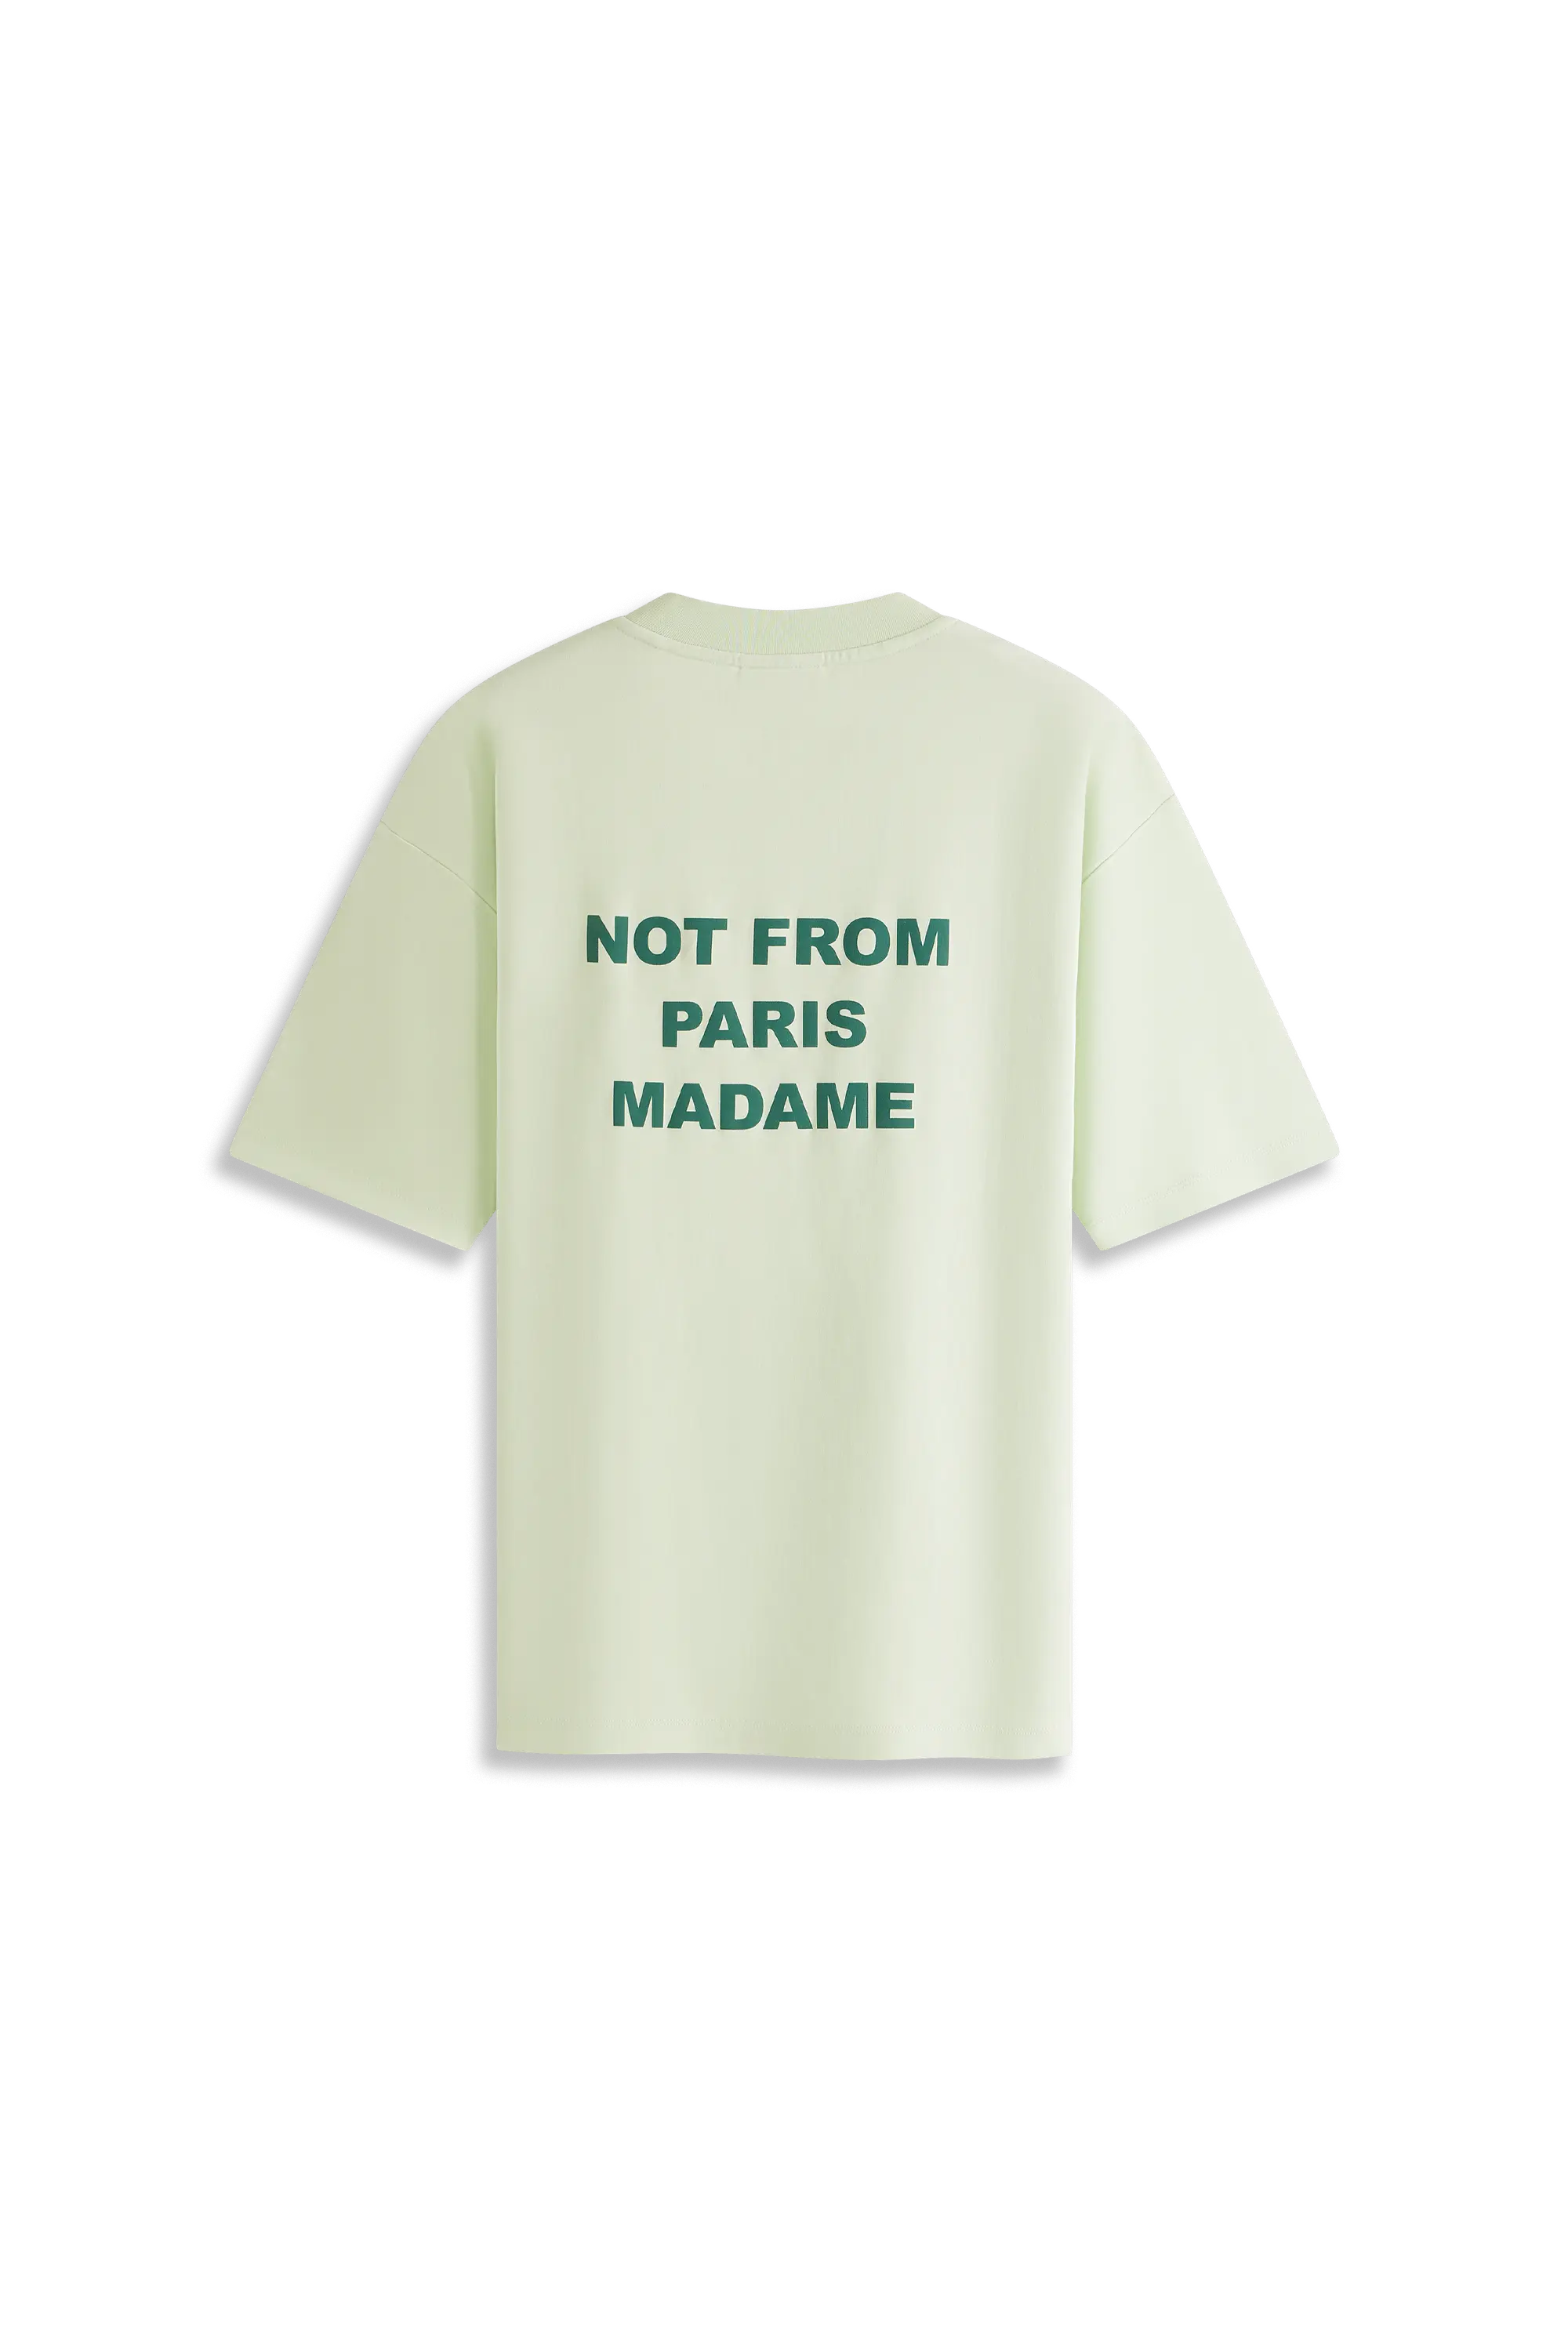 green drôle de monsieur t shirt with text that reads no from paris madame